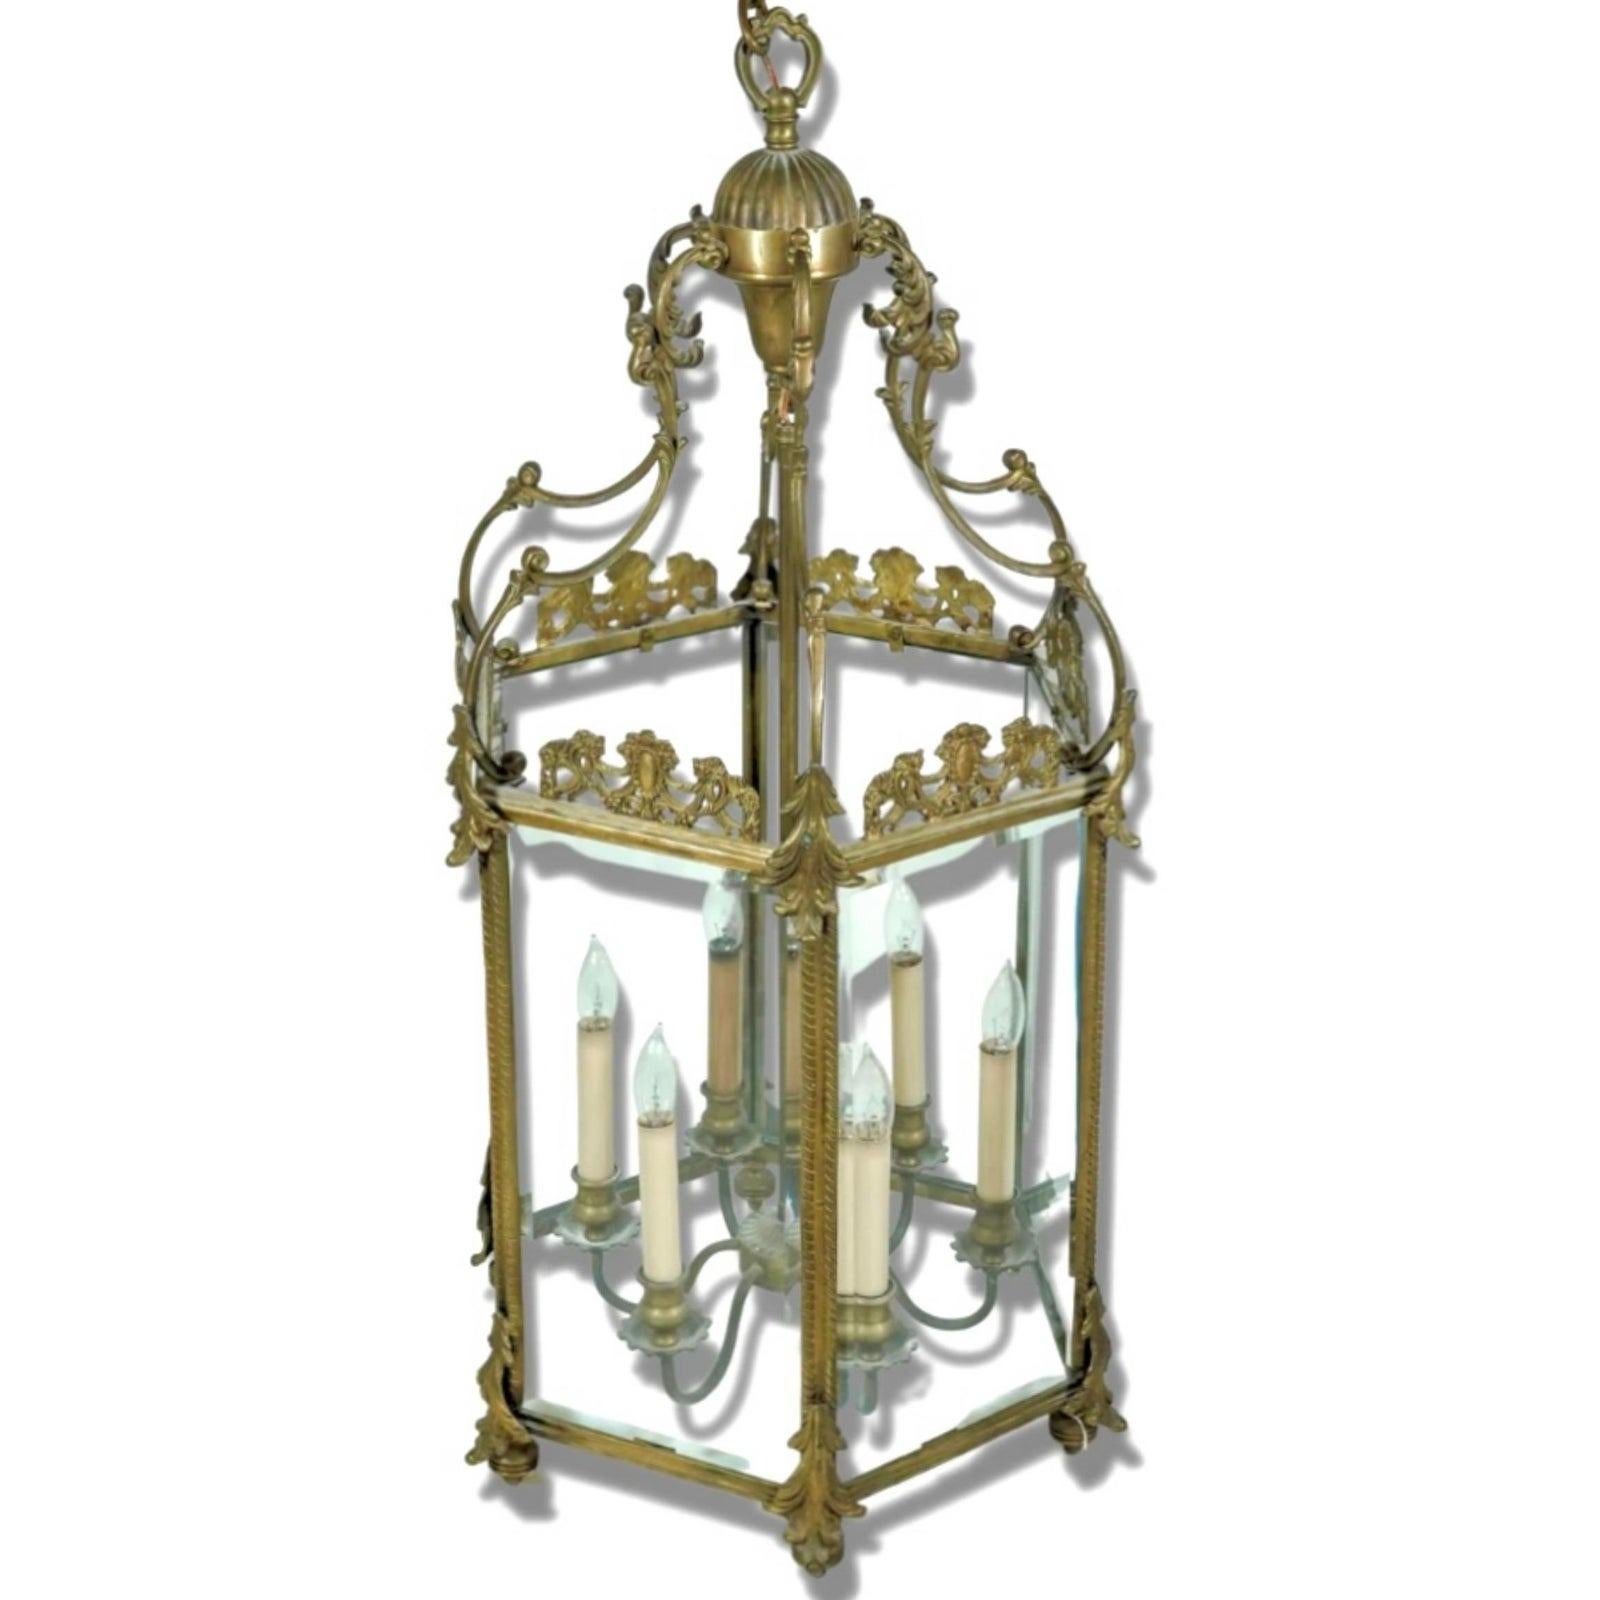 A stunning vintage Regency lantern. Done in the Louis VX style with. Bronze frame and gold finish. Inset glass panels. Perfect for your foyer or as a glamorous chandelier in your dining space. Acquired from a Palm Beach estate.